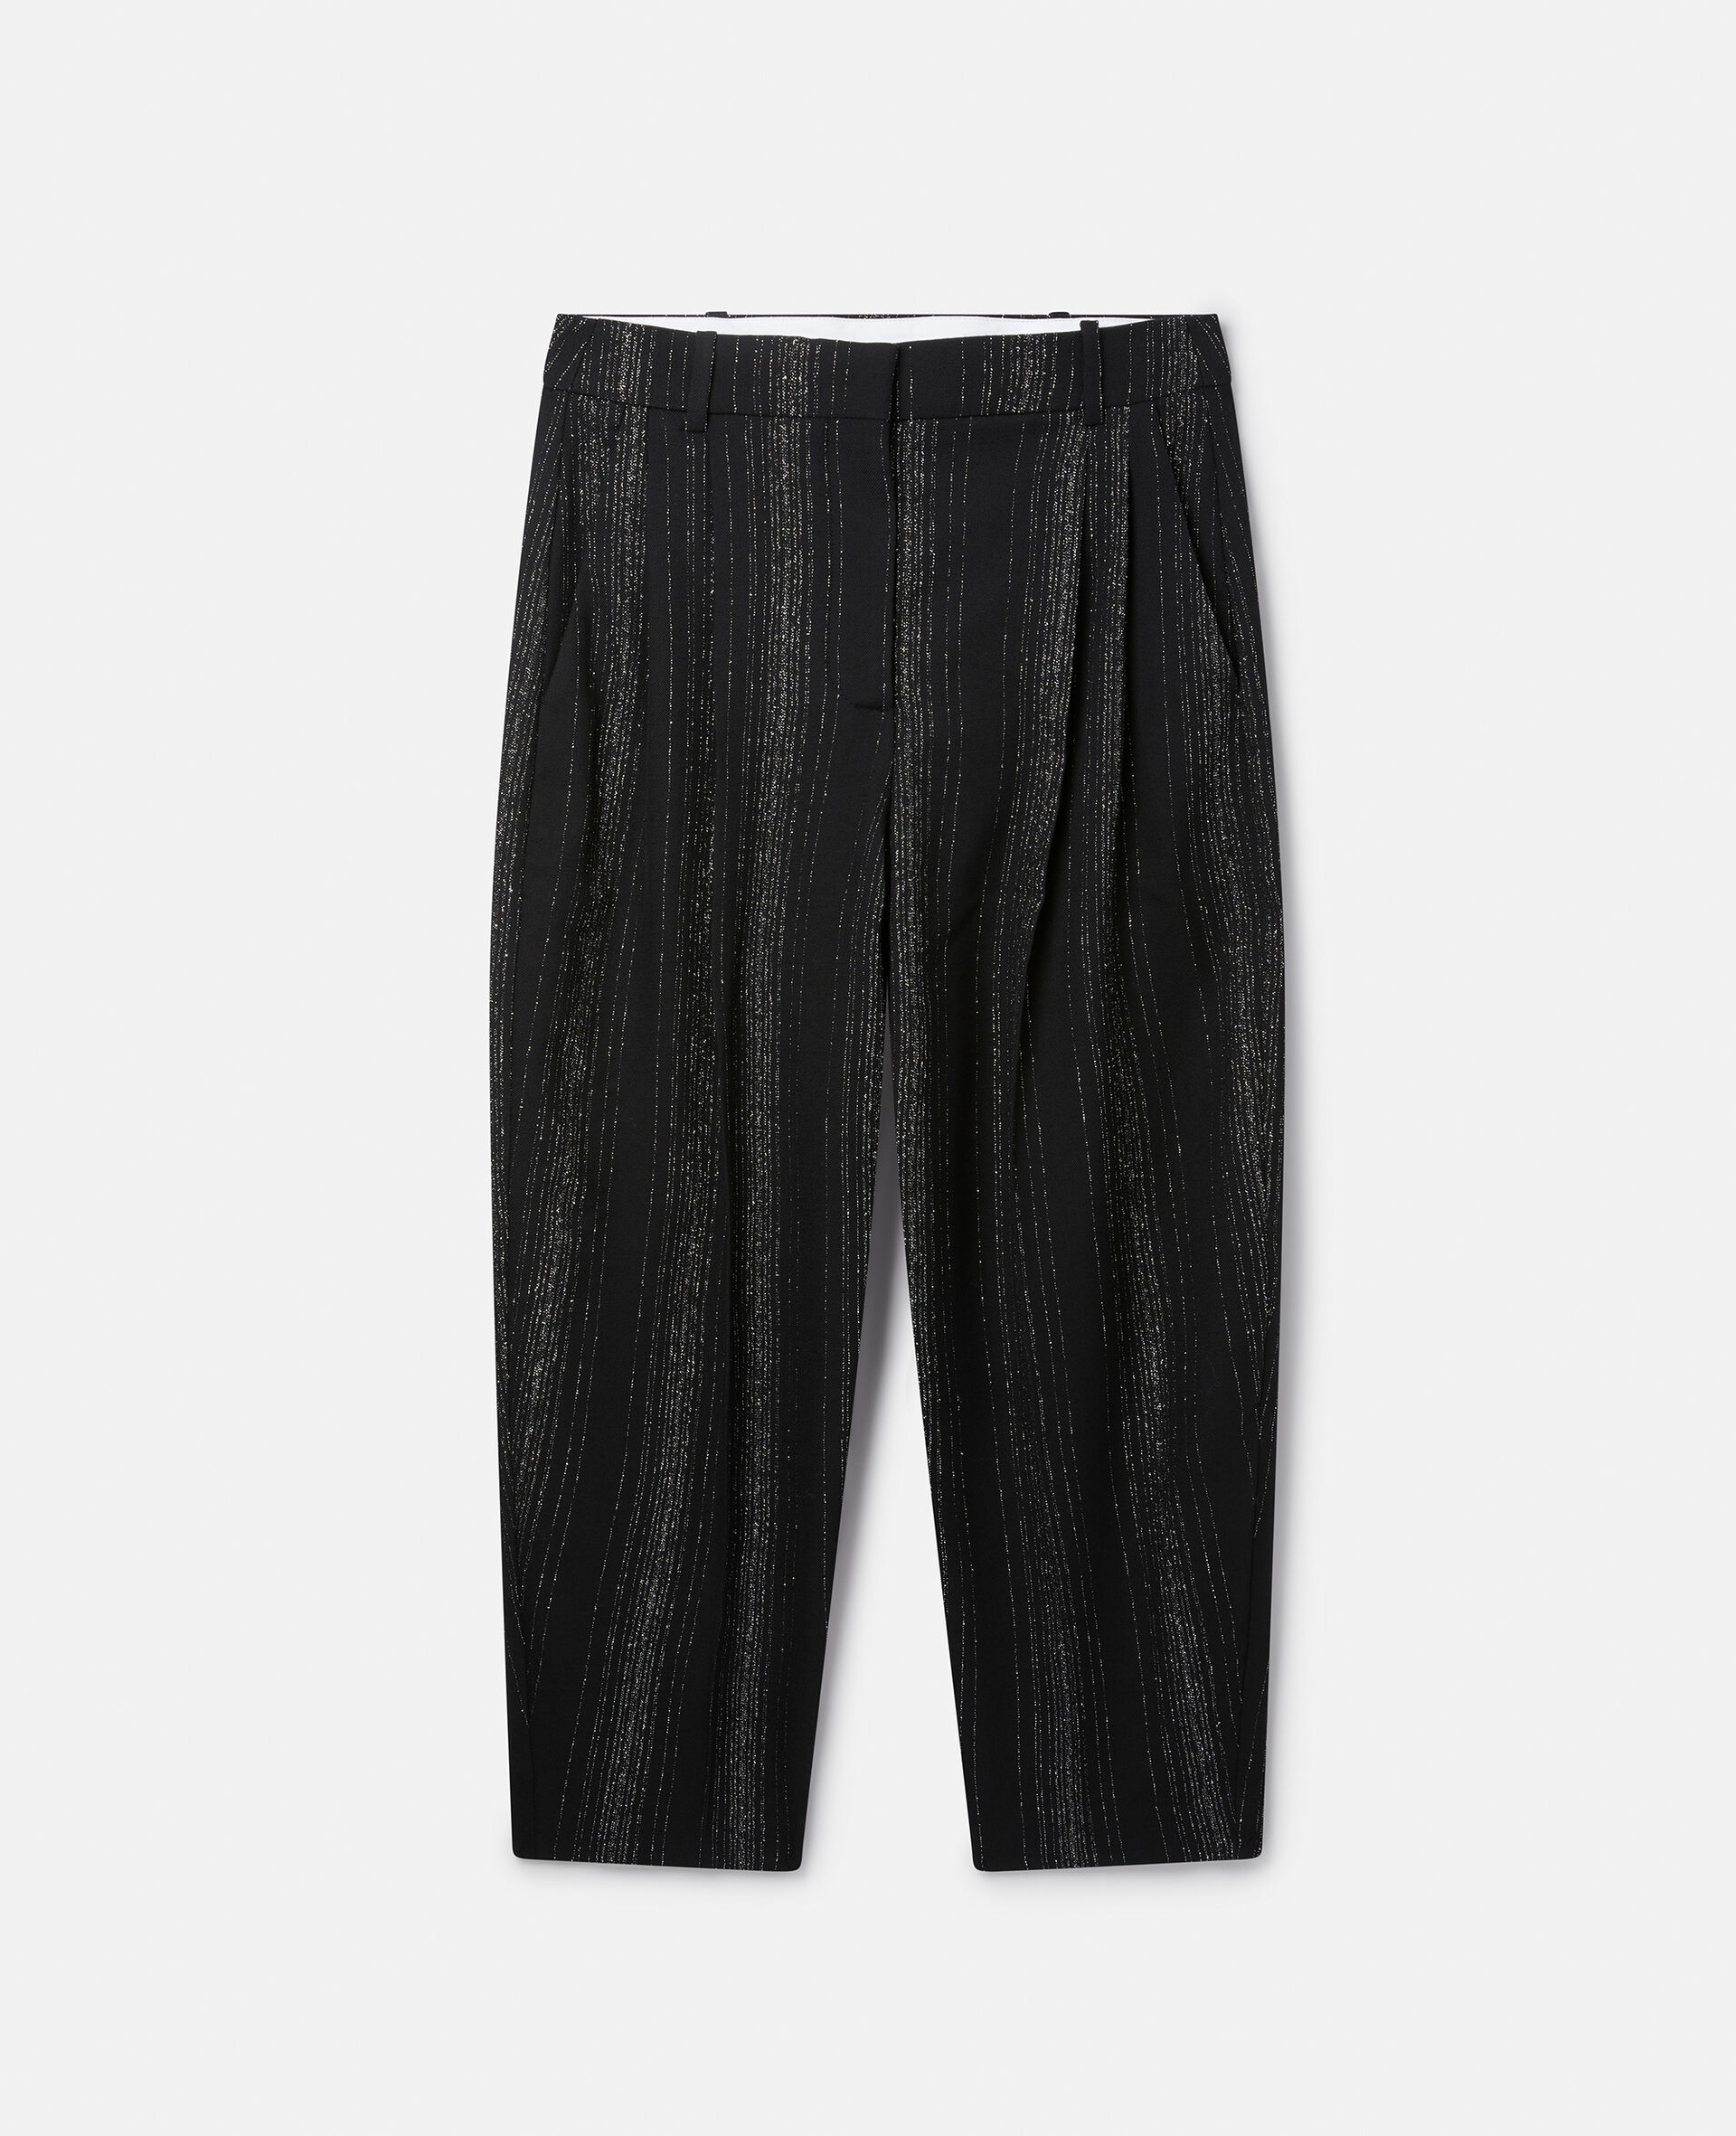 Tailored Wool Trousers-Black-large